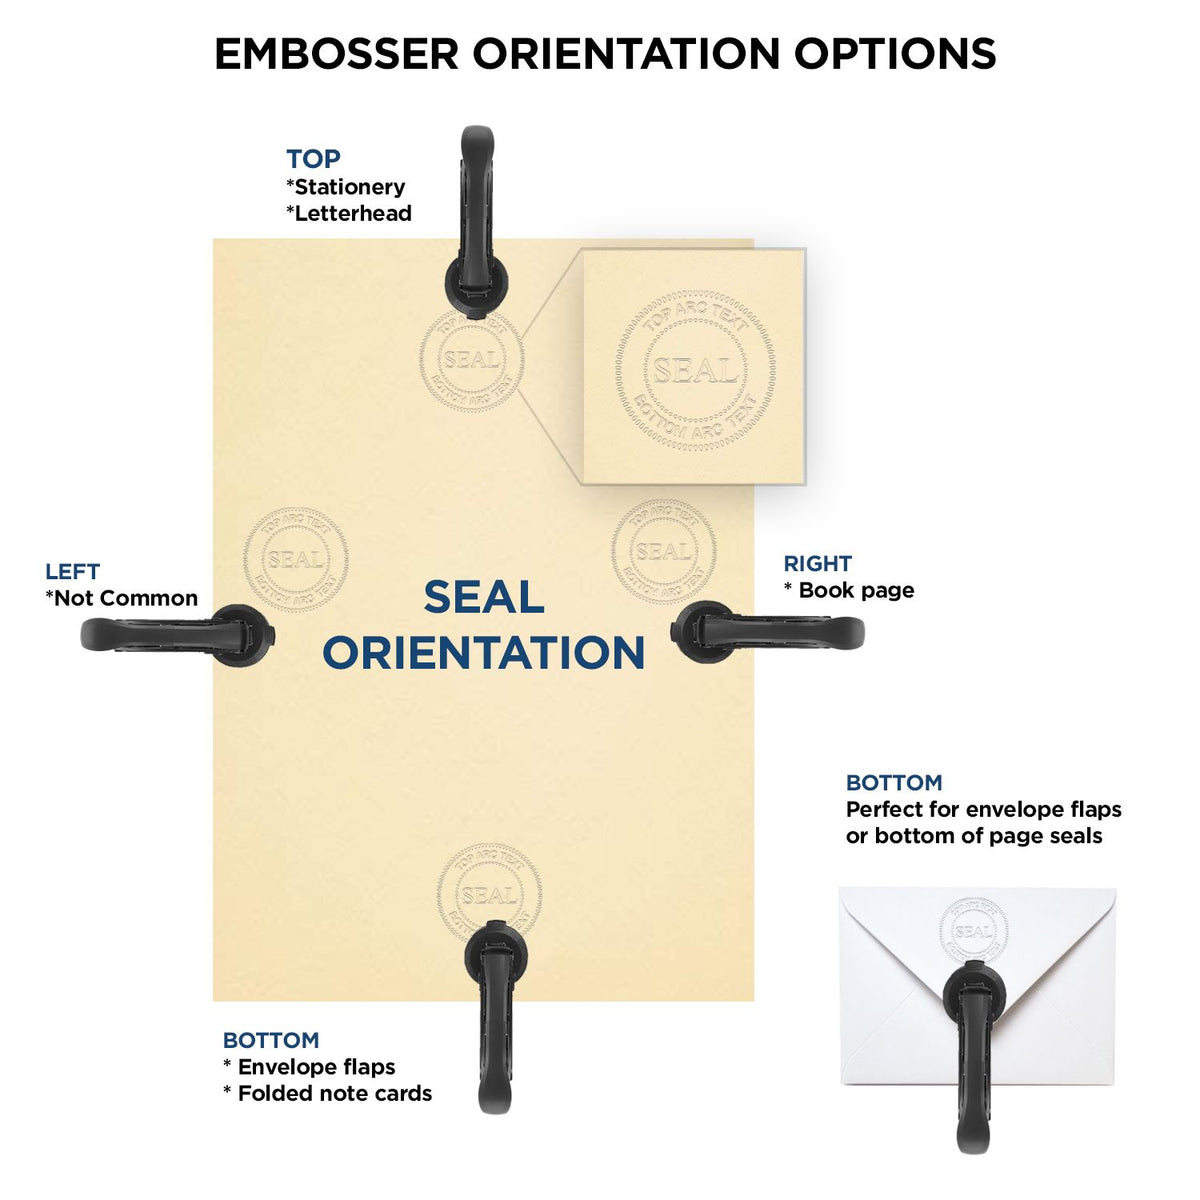 An infographic for the Arkansas Geologist Desk Seal showing embosser orientation, this is showing examples of a top, bottom, right and left insert.